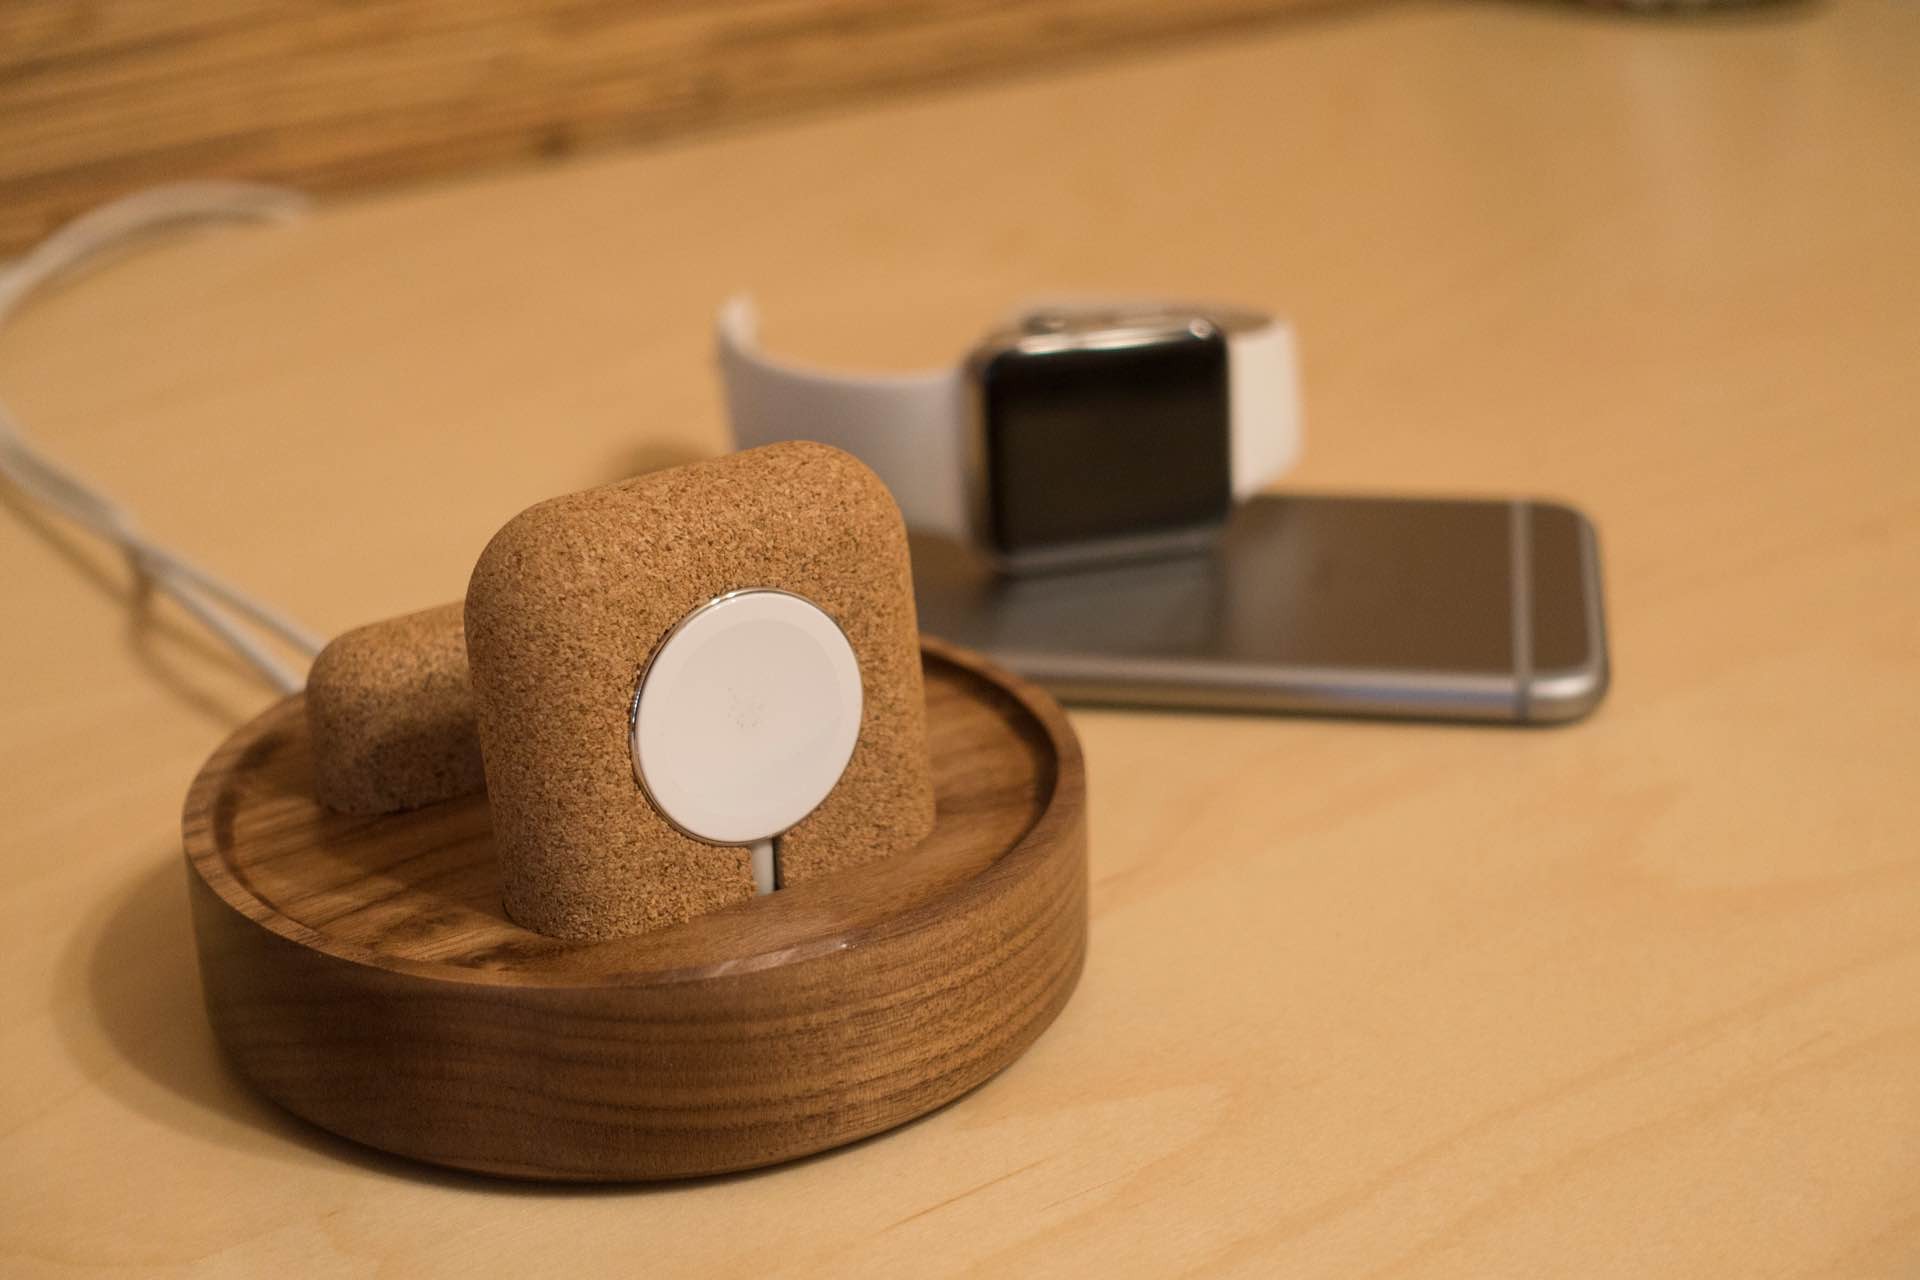 Studio Neat's Material Dock for iPhone and Apple Watch. ($45$95 depending on configuration)